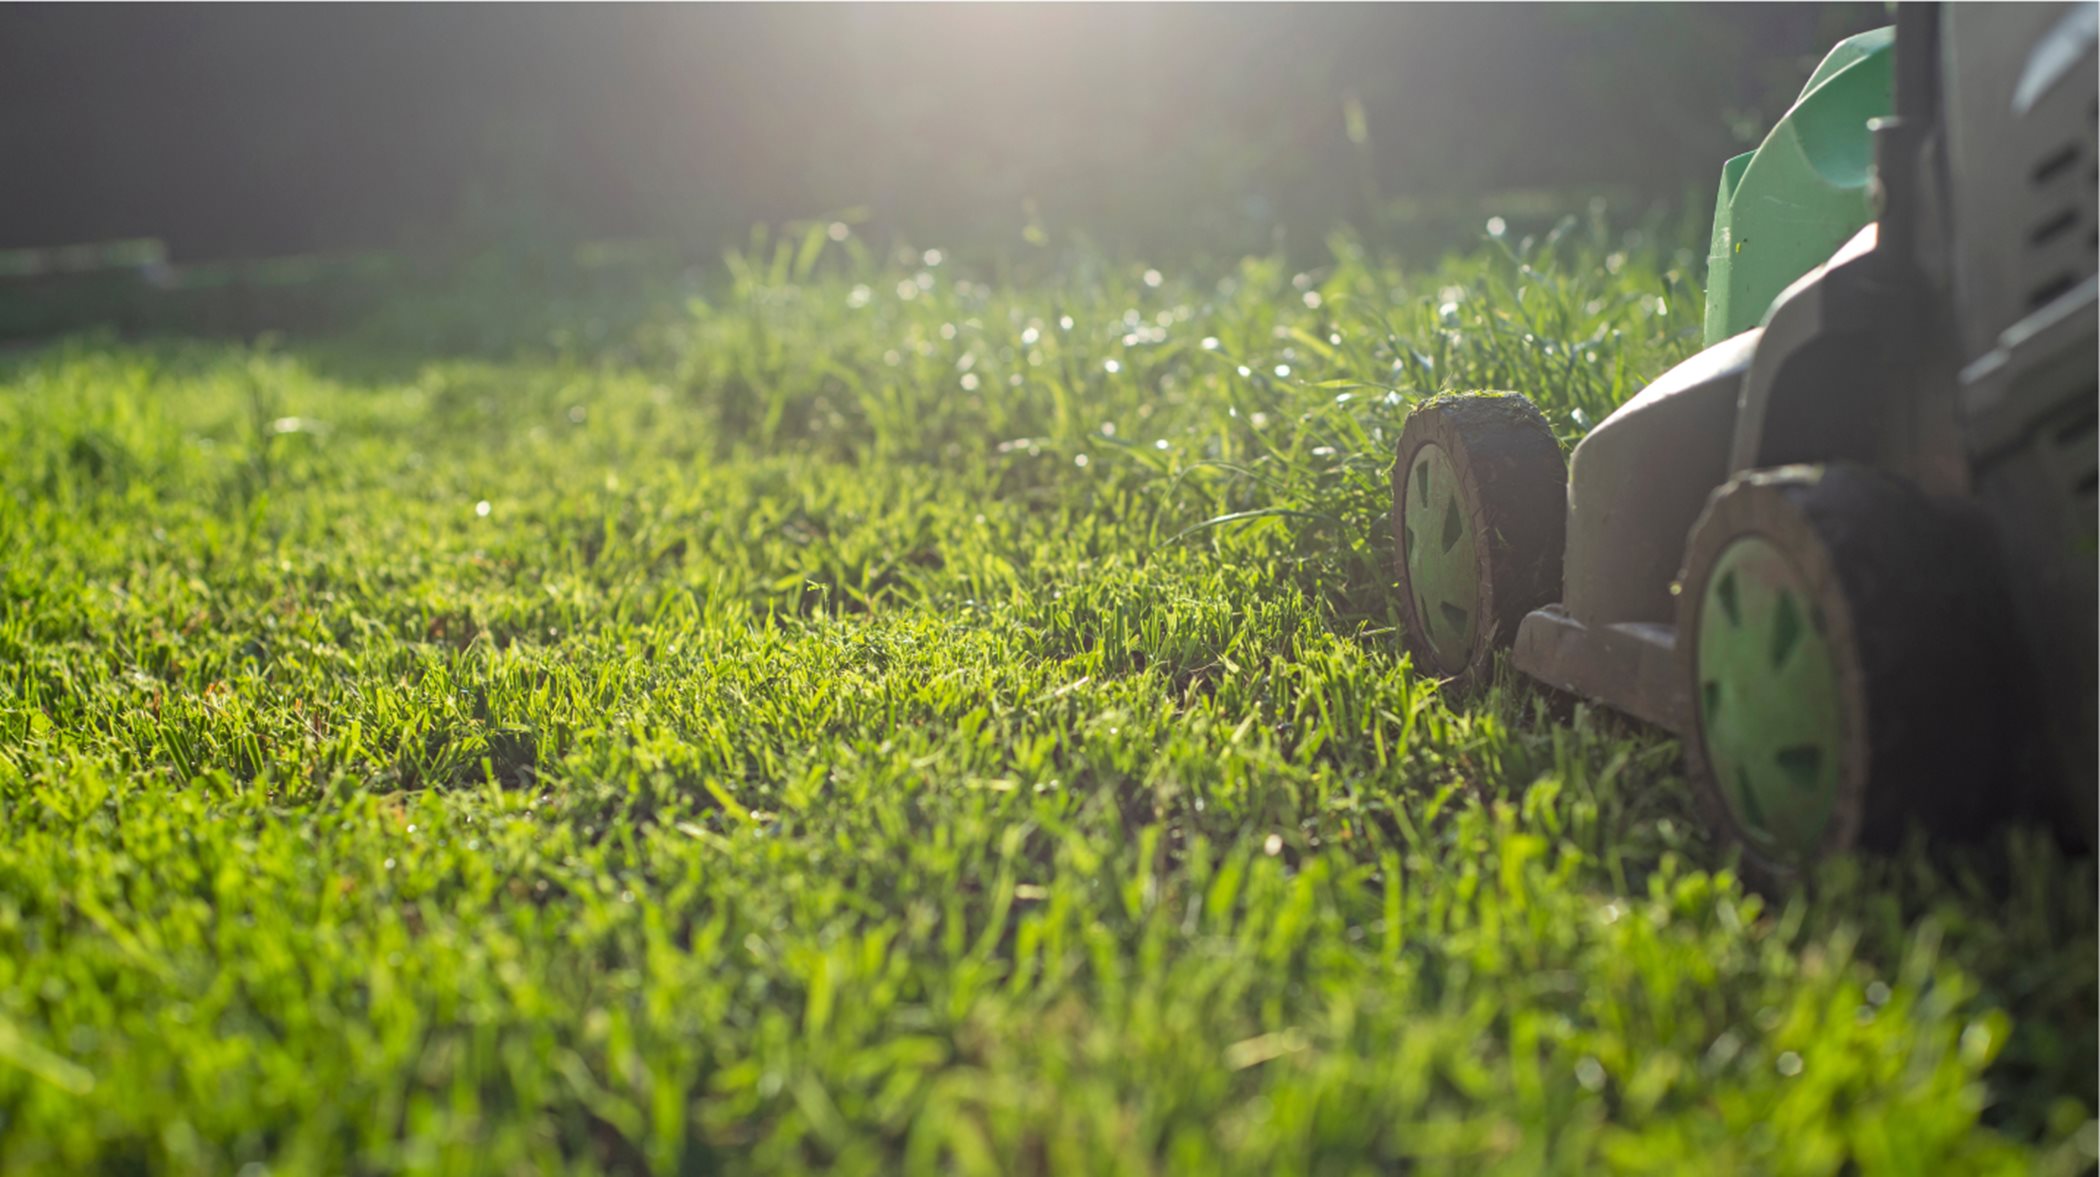 Close-up of lawnmower cutting grass